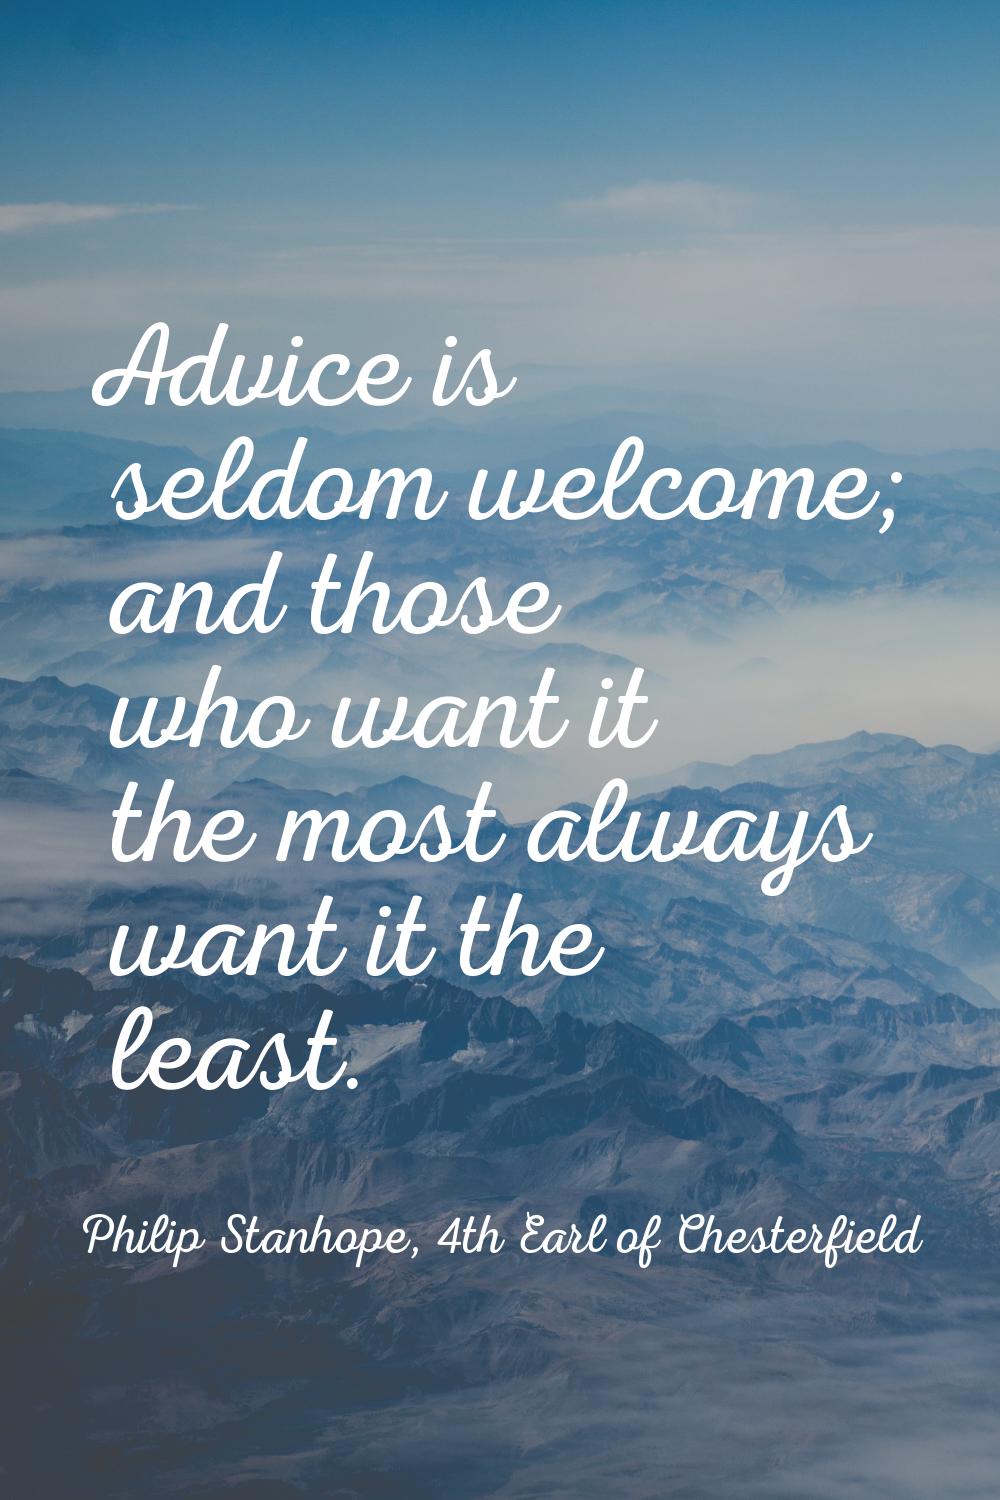 Advice is seldom welcome; and those who want it the most always want it the least.